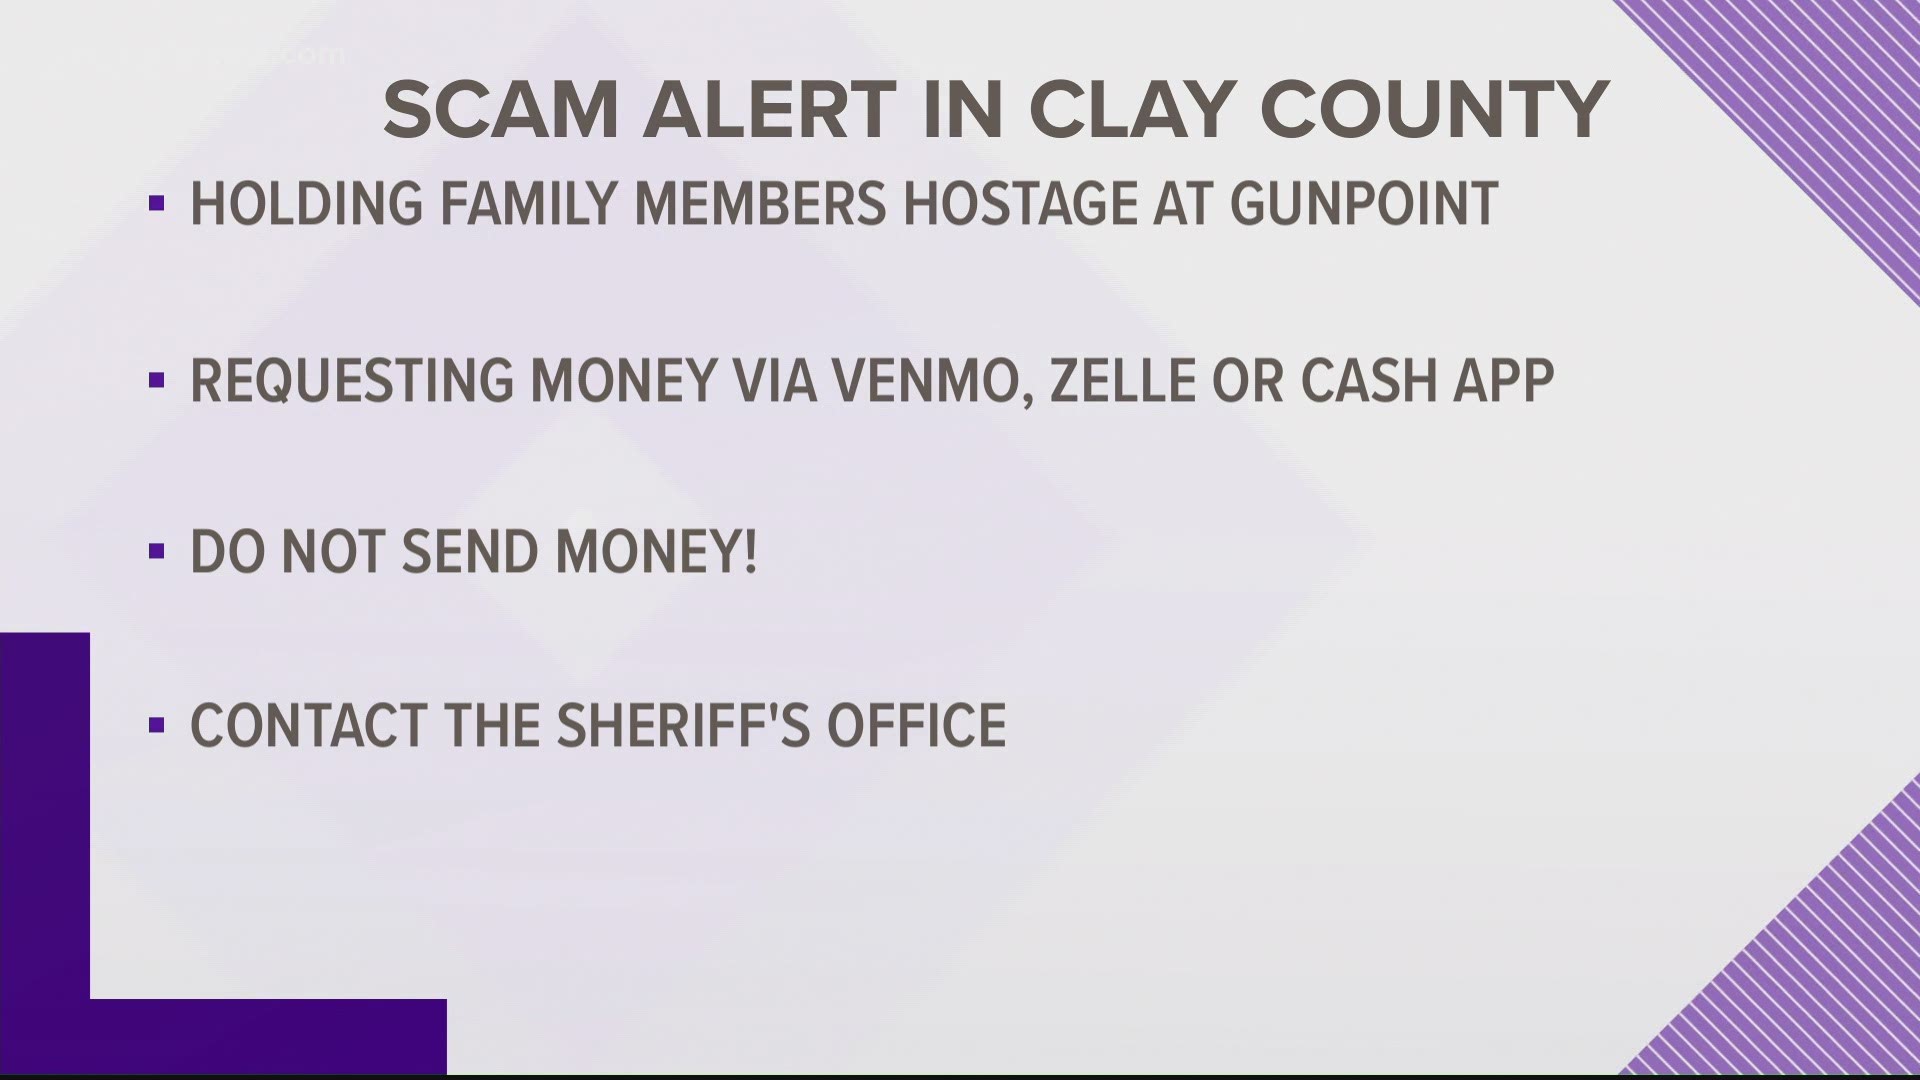 The scammer will tell the victim their family is being held hostage before demanding ransom, the Clay County Sheriff's Office said.